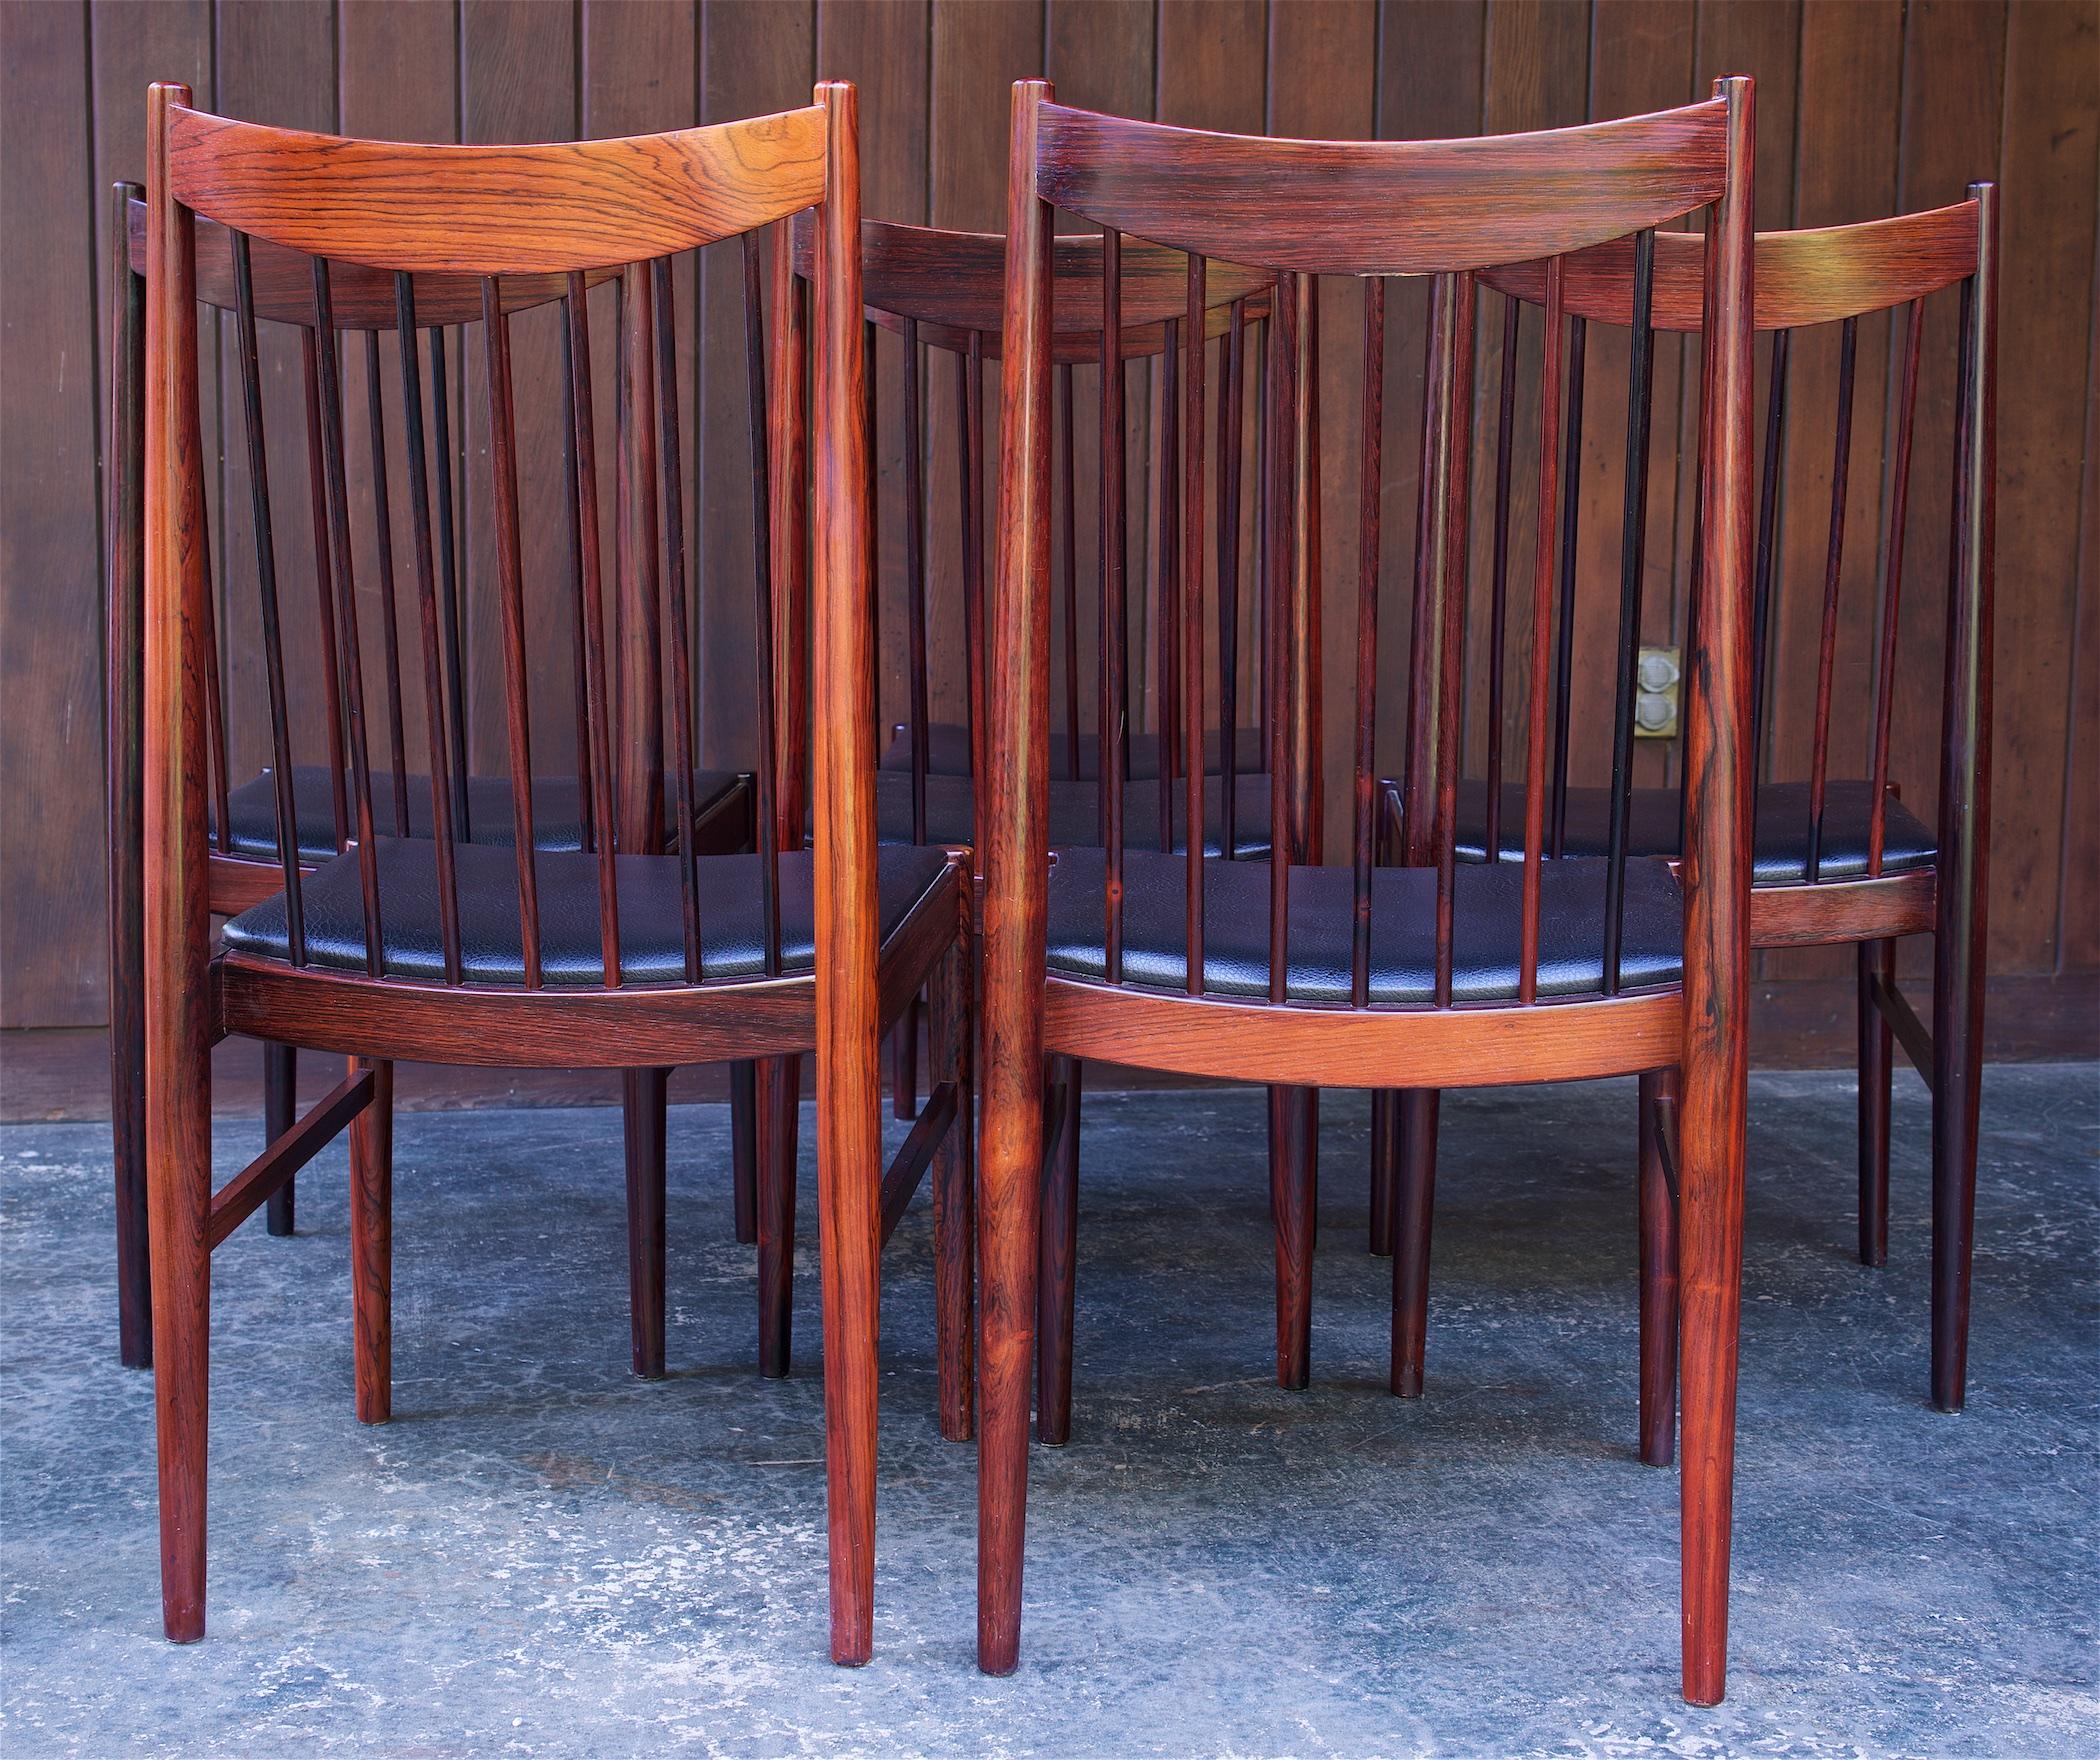 8 Brazilian Rosewood Spindle High-Back Dining Chairs Danish Sibast Model No. 422 For Sale 3